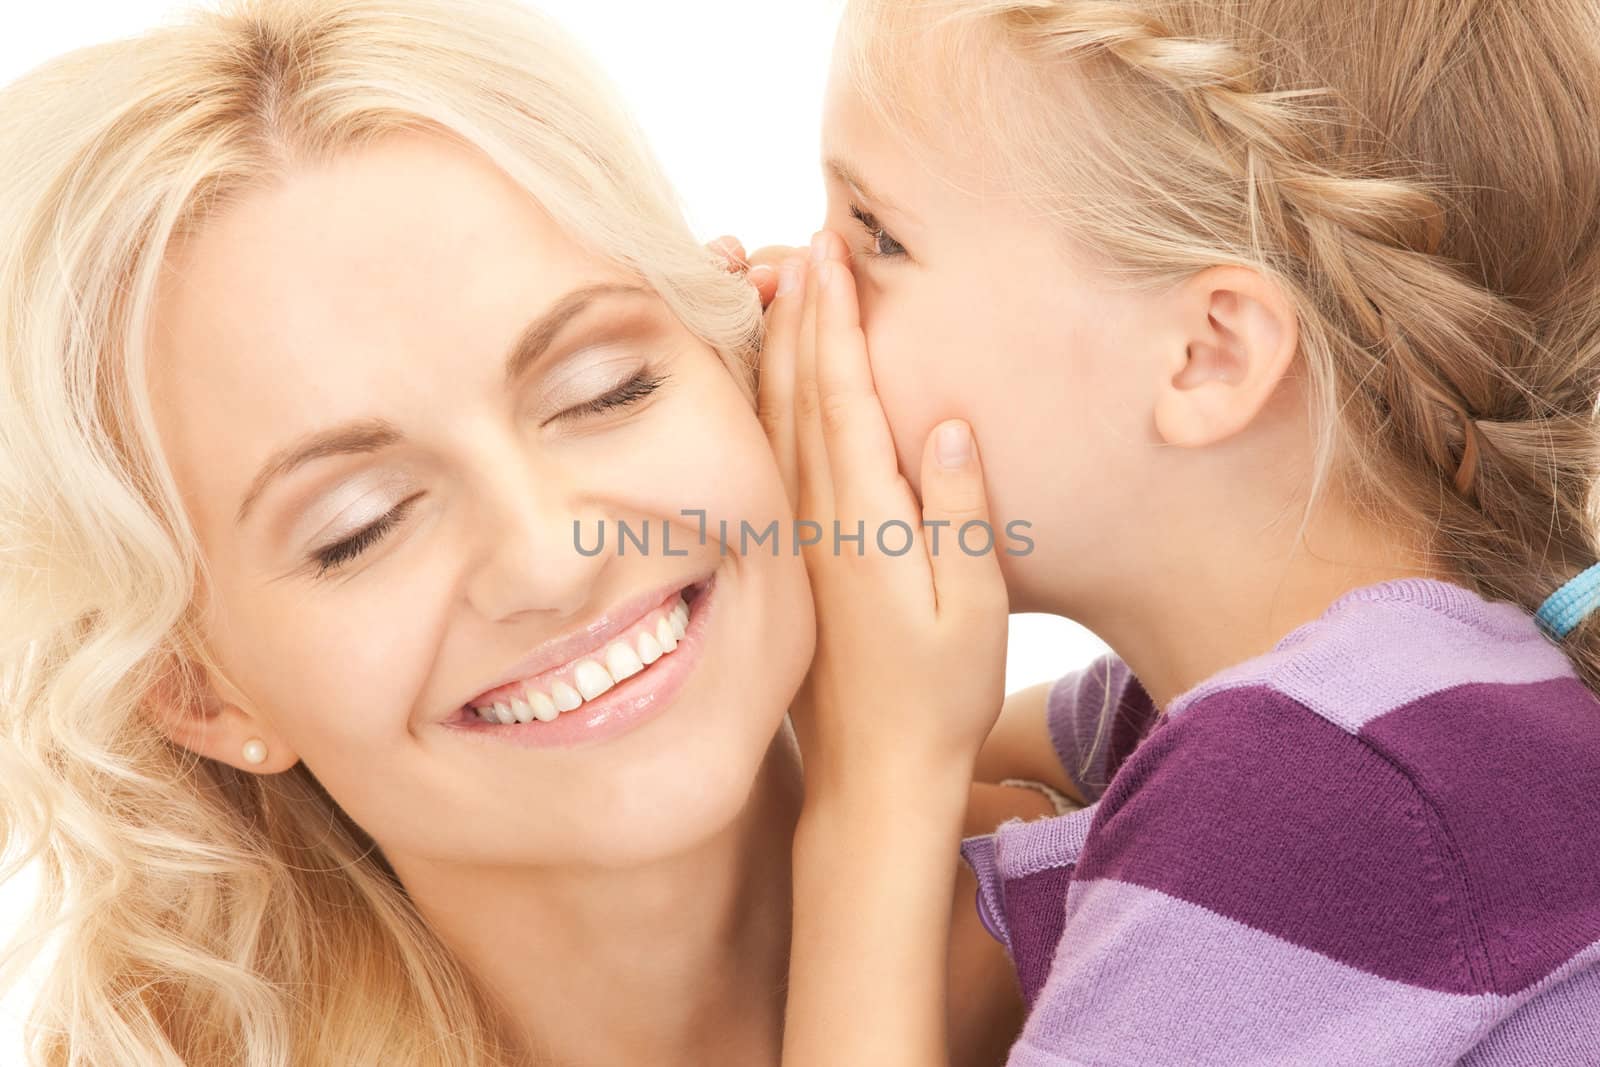 bright picture of happy mother and child (focus on girl)